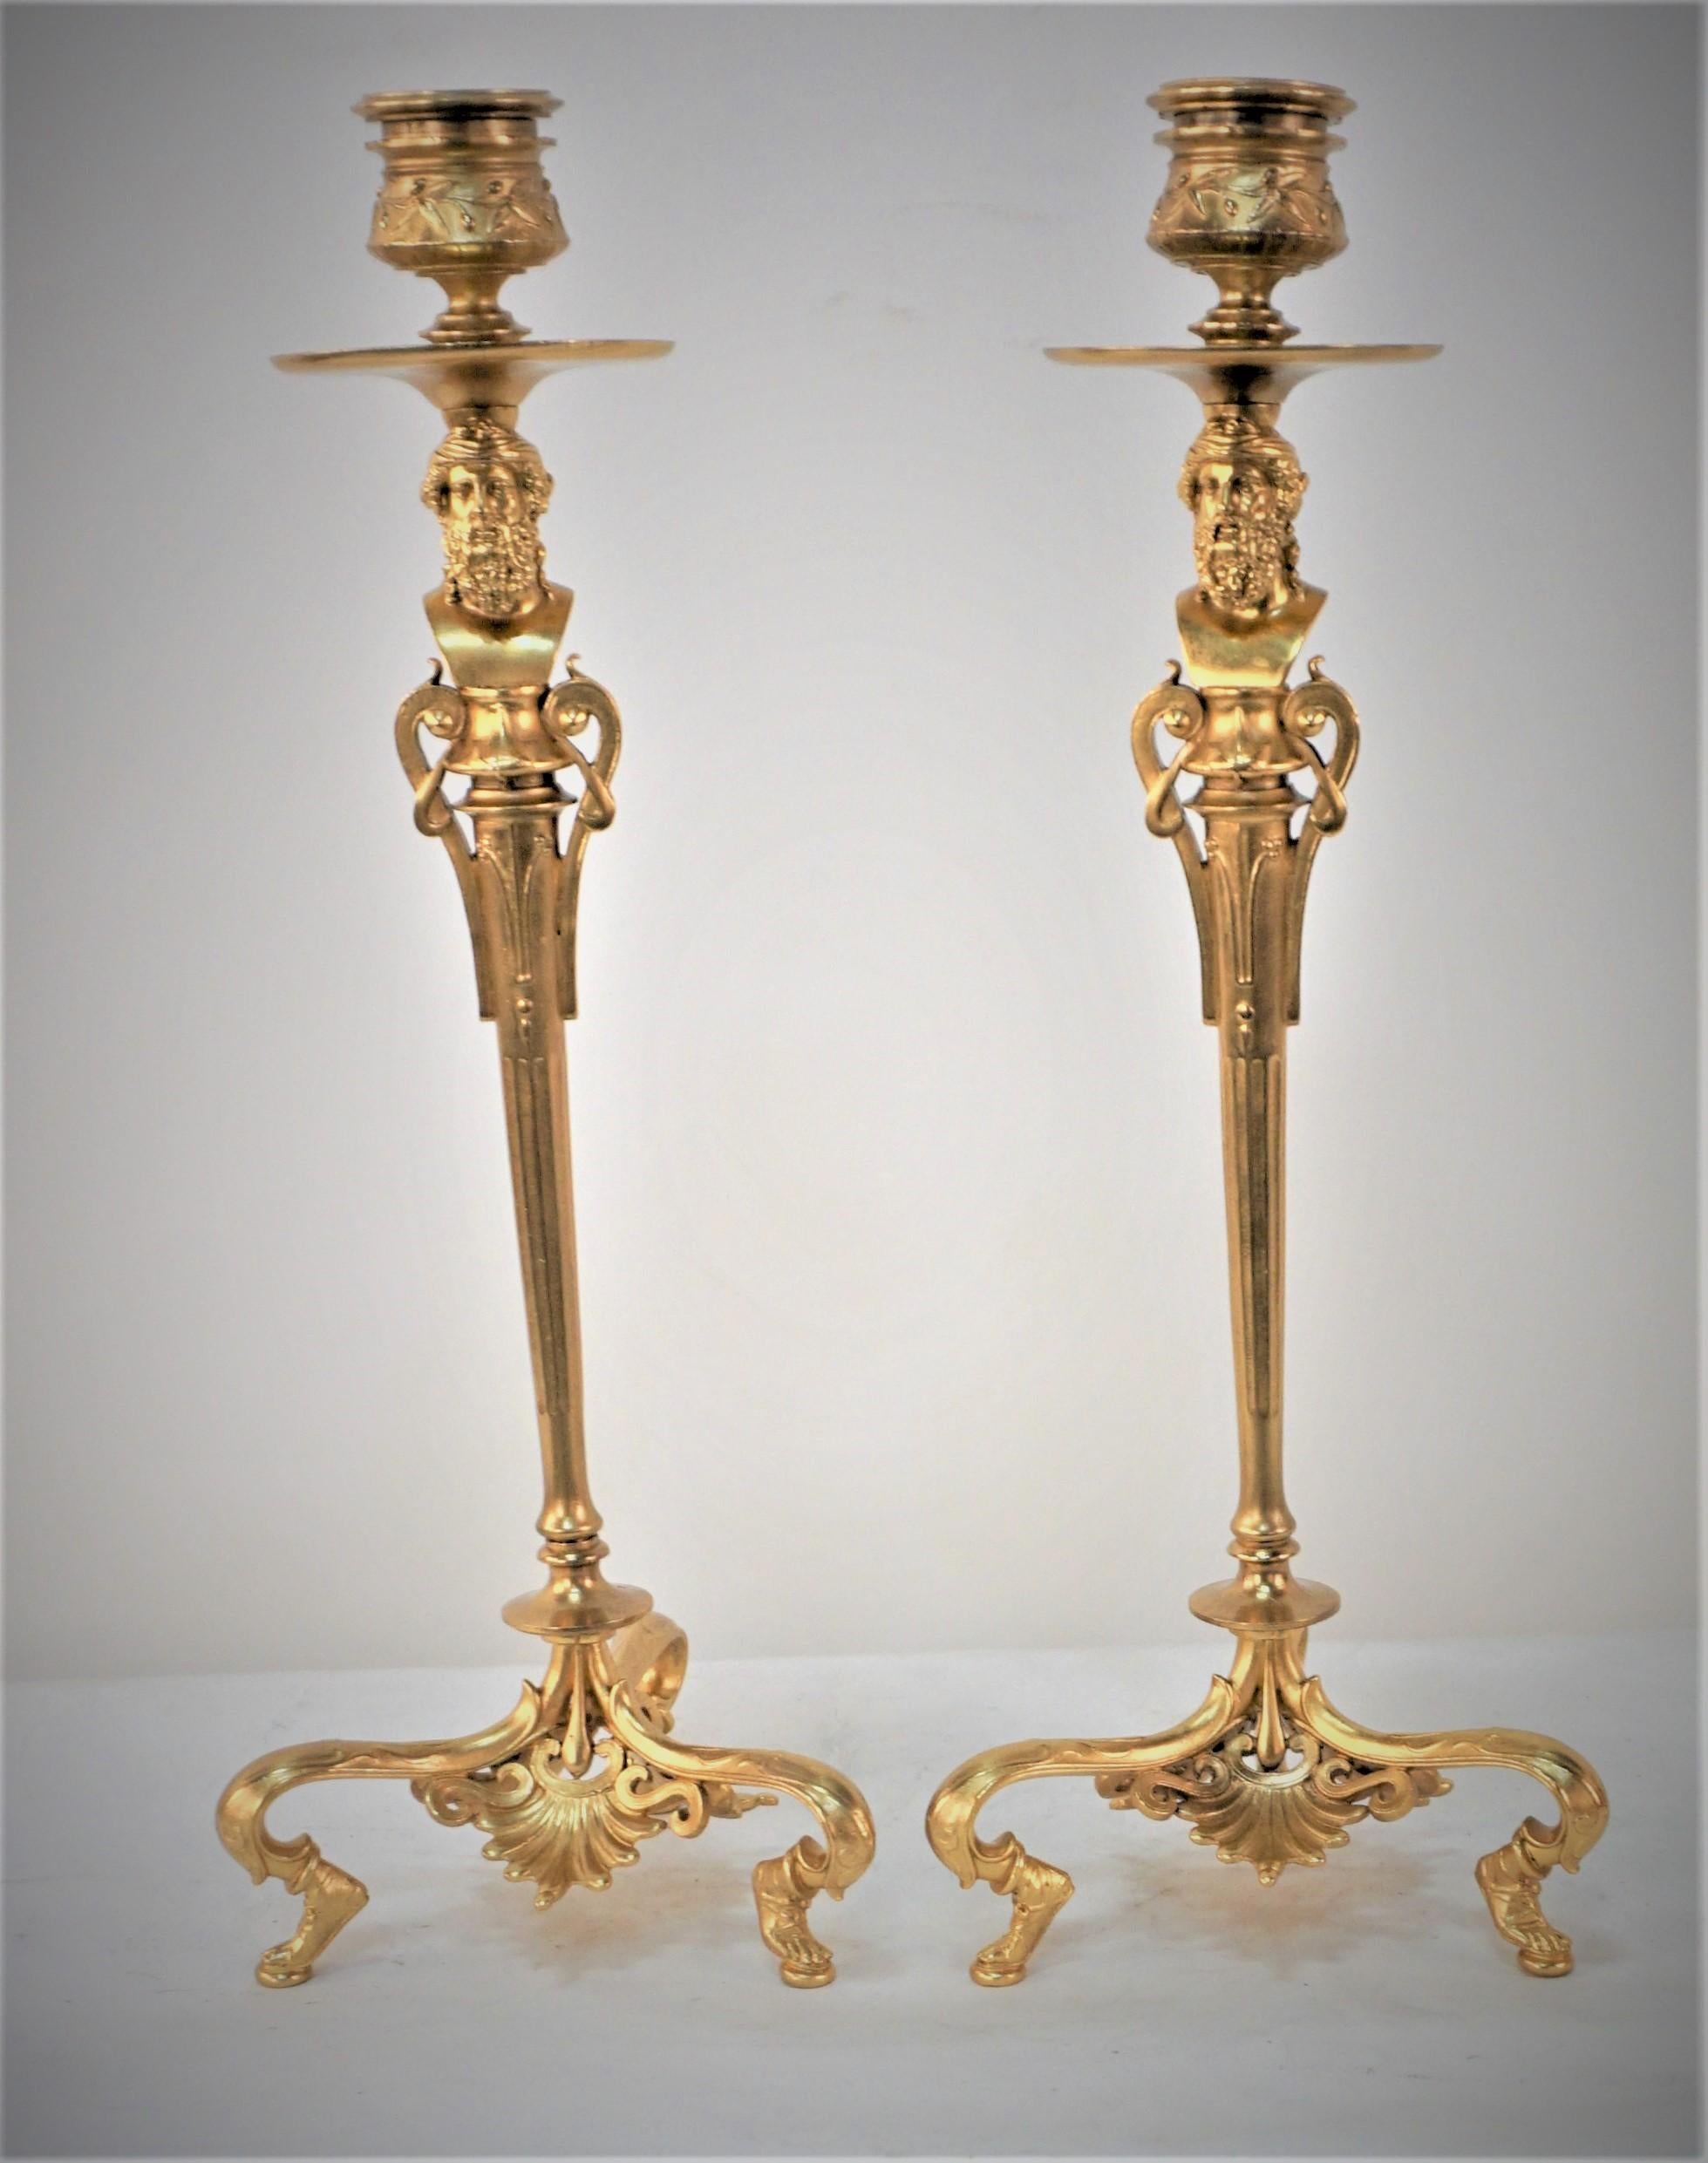 Pair of 19th century gilt bronze candlesticks in classic roman style bust and human feet base by Barbedianne.